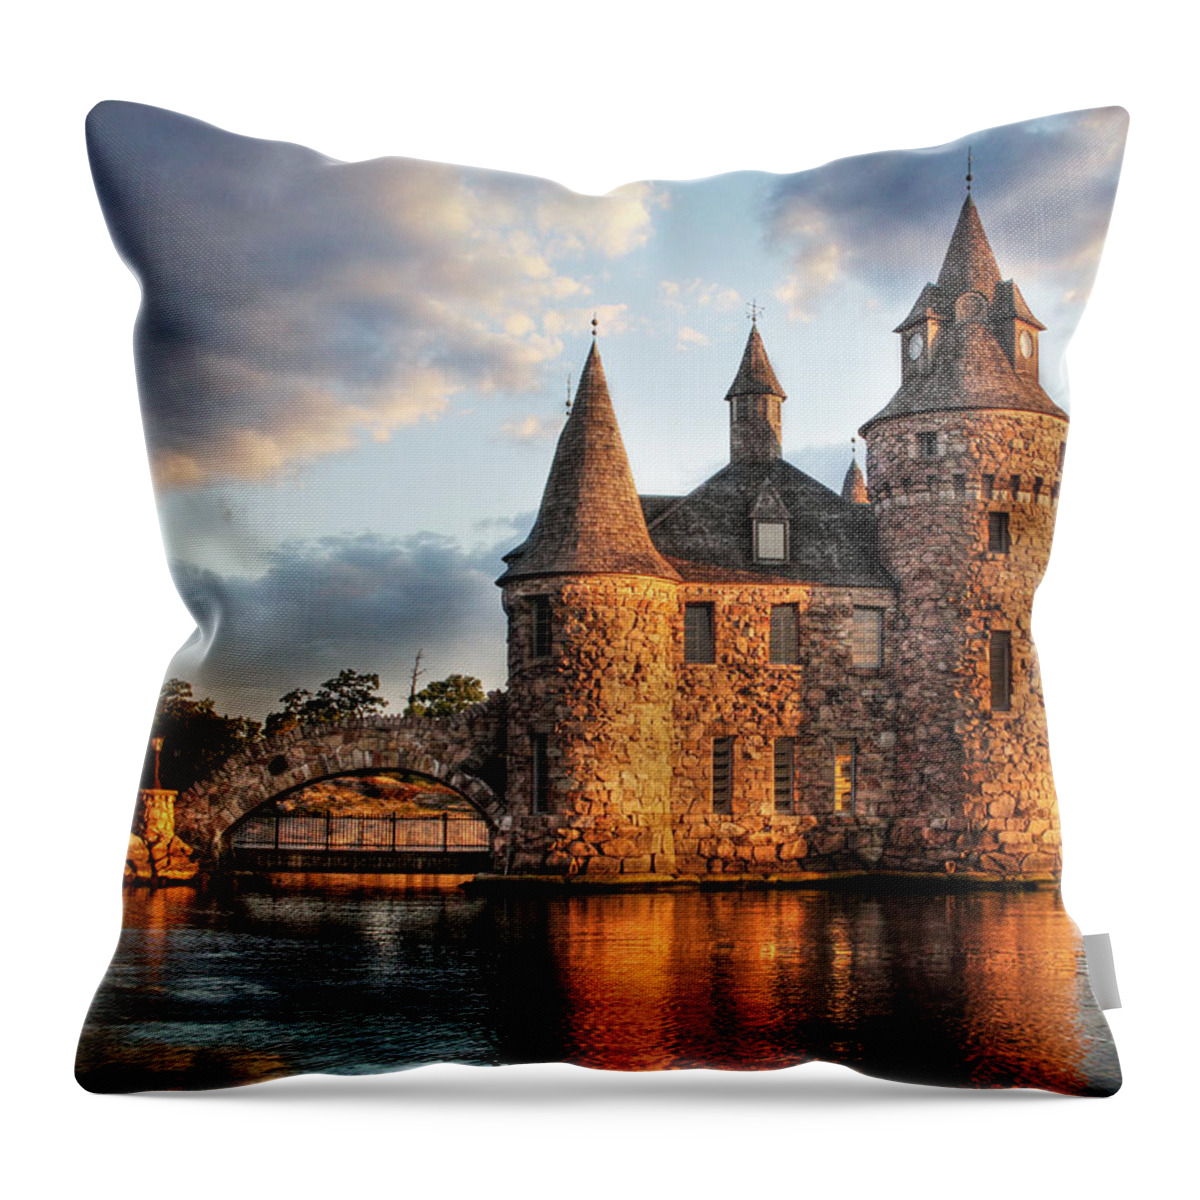 Thousand Islands Throw Pillow featuring the photograph Where Time Stands Still by Lori Deiter